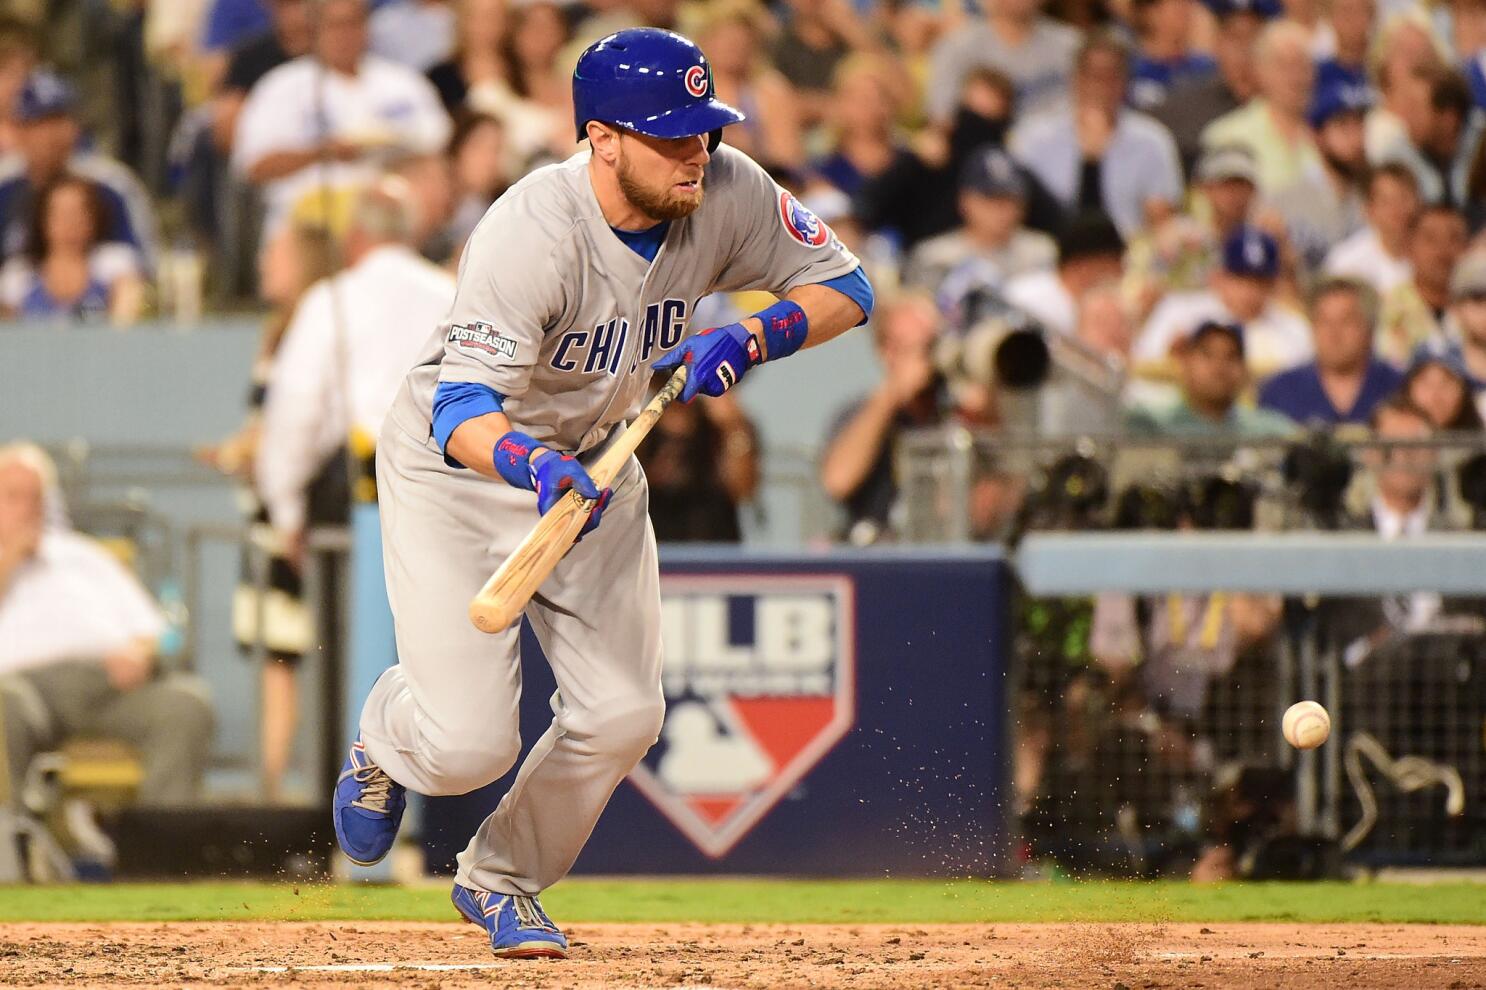 Cubs’ bats break out of slump starting with a bunt - Los